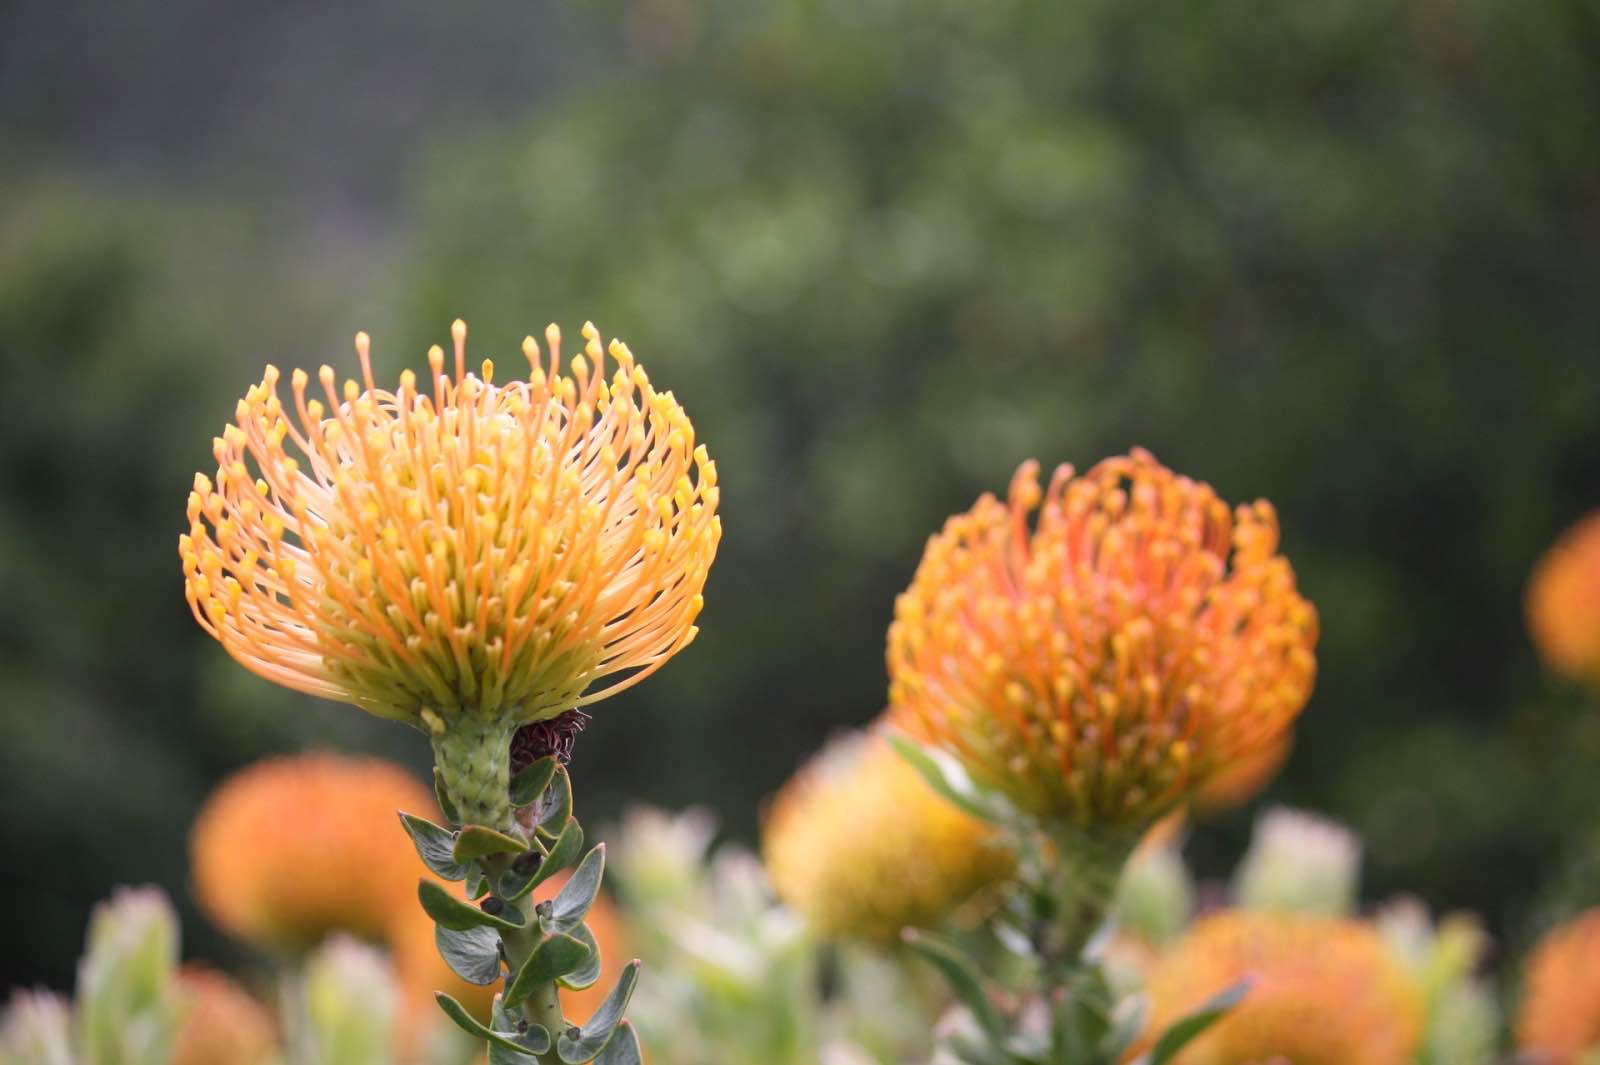 Pin cushions, part of the Cape fynbos kingdom